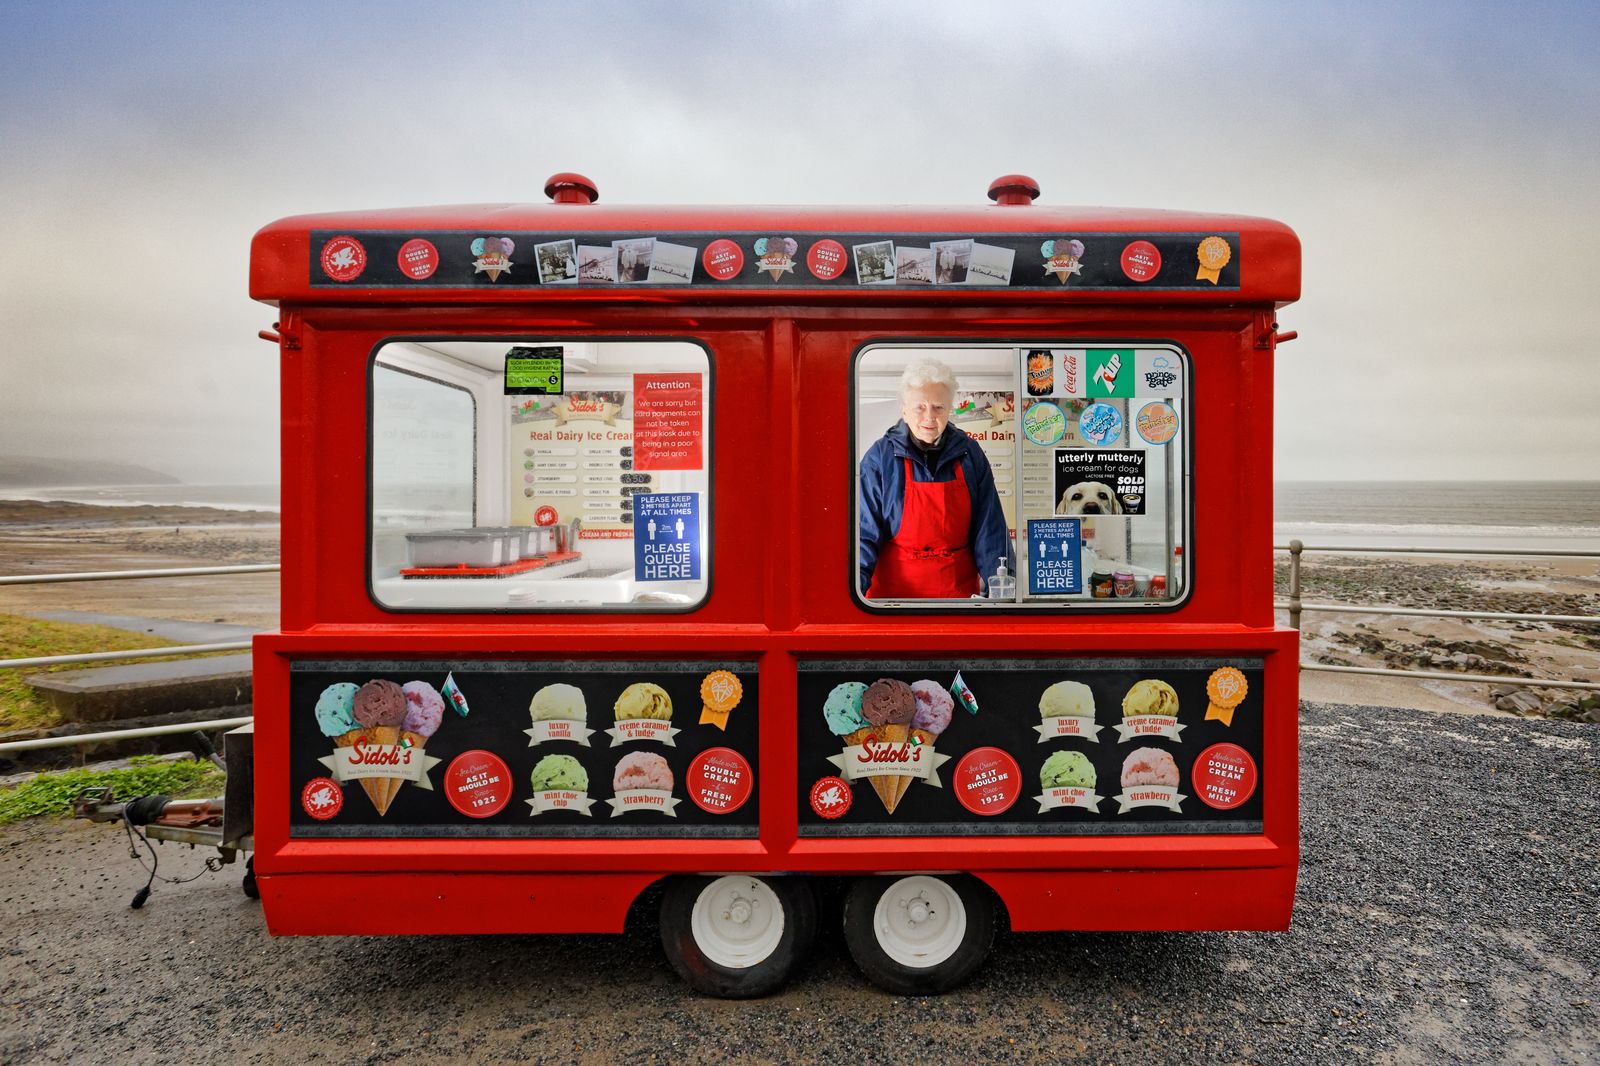 Carol Rees who sells ice lollies near Saundersfoot after Covid-19 lockdown measures are relaxed in Wales, UK